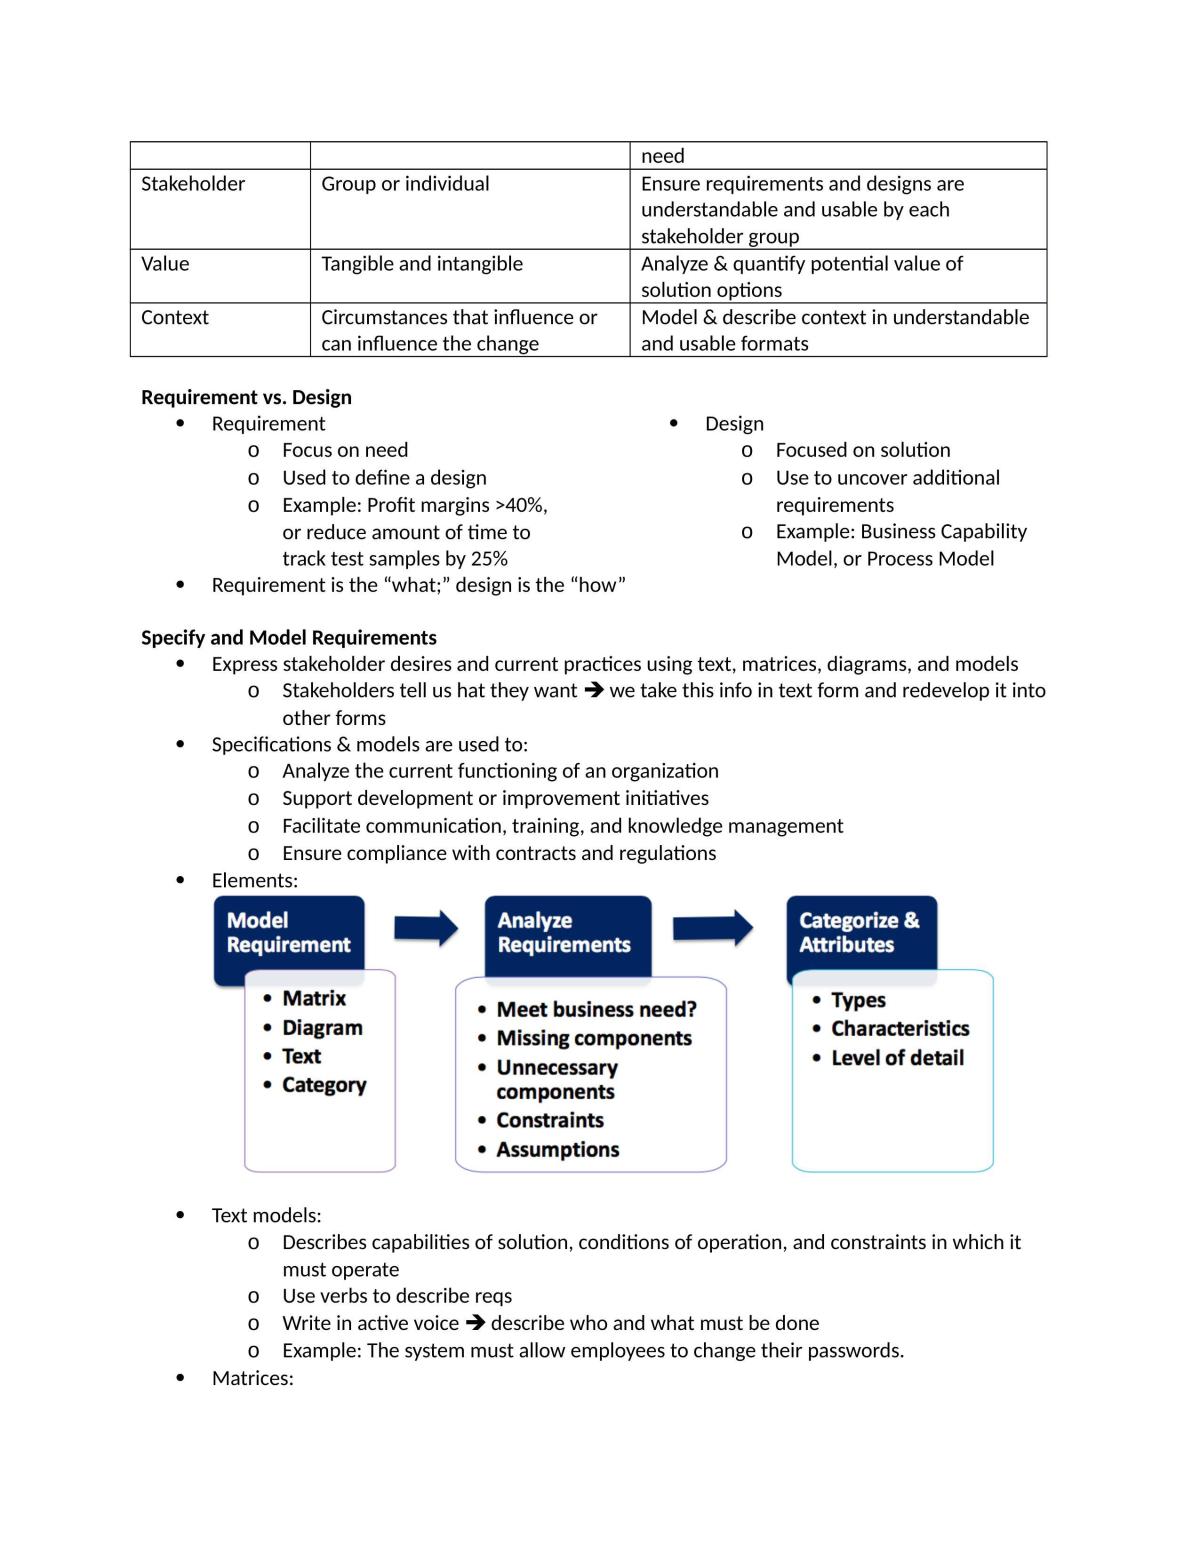 Complete Study Notes - BA2379 - Page 51